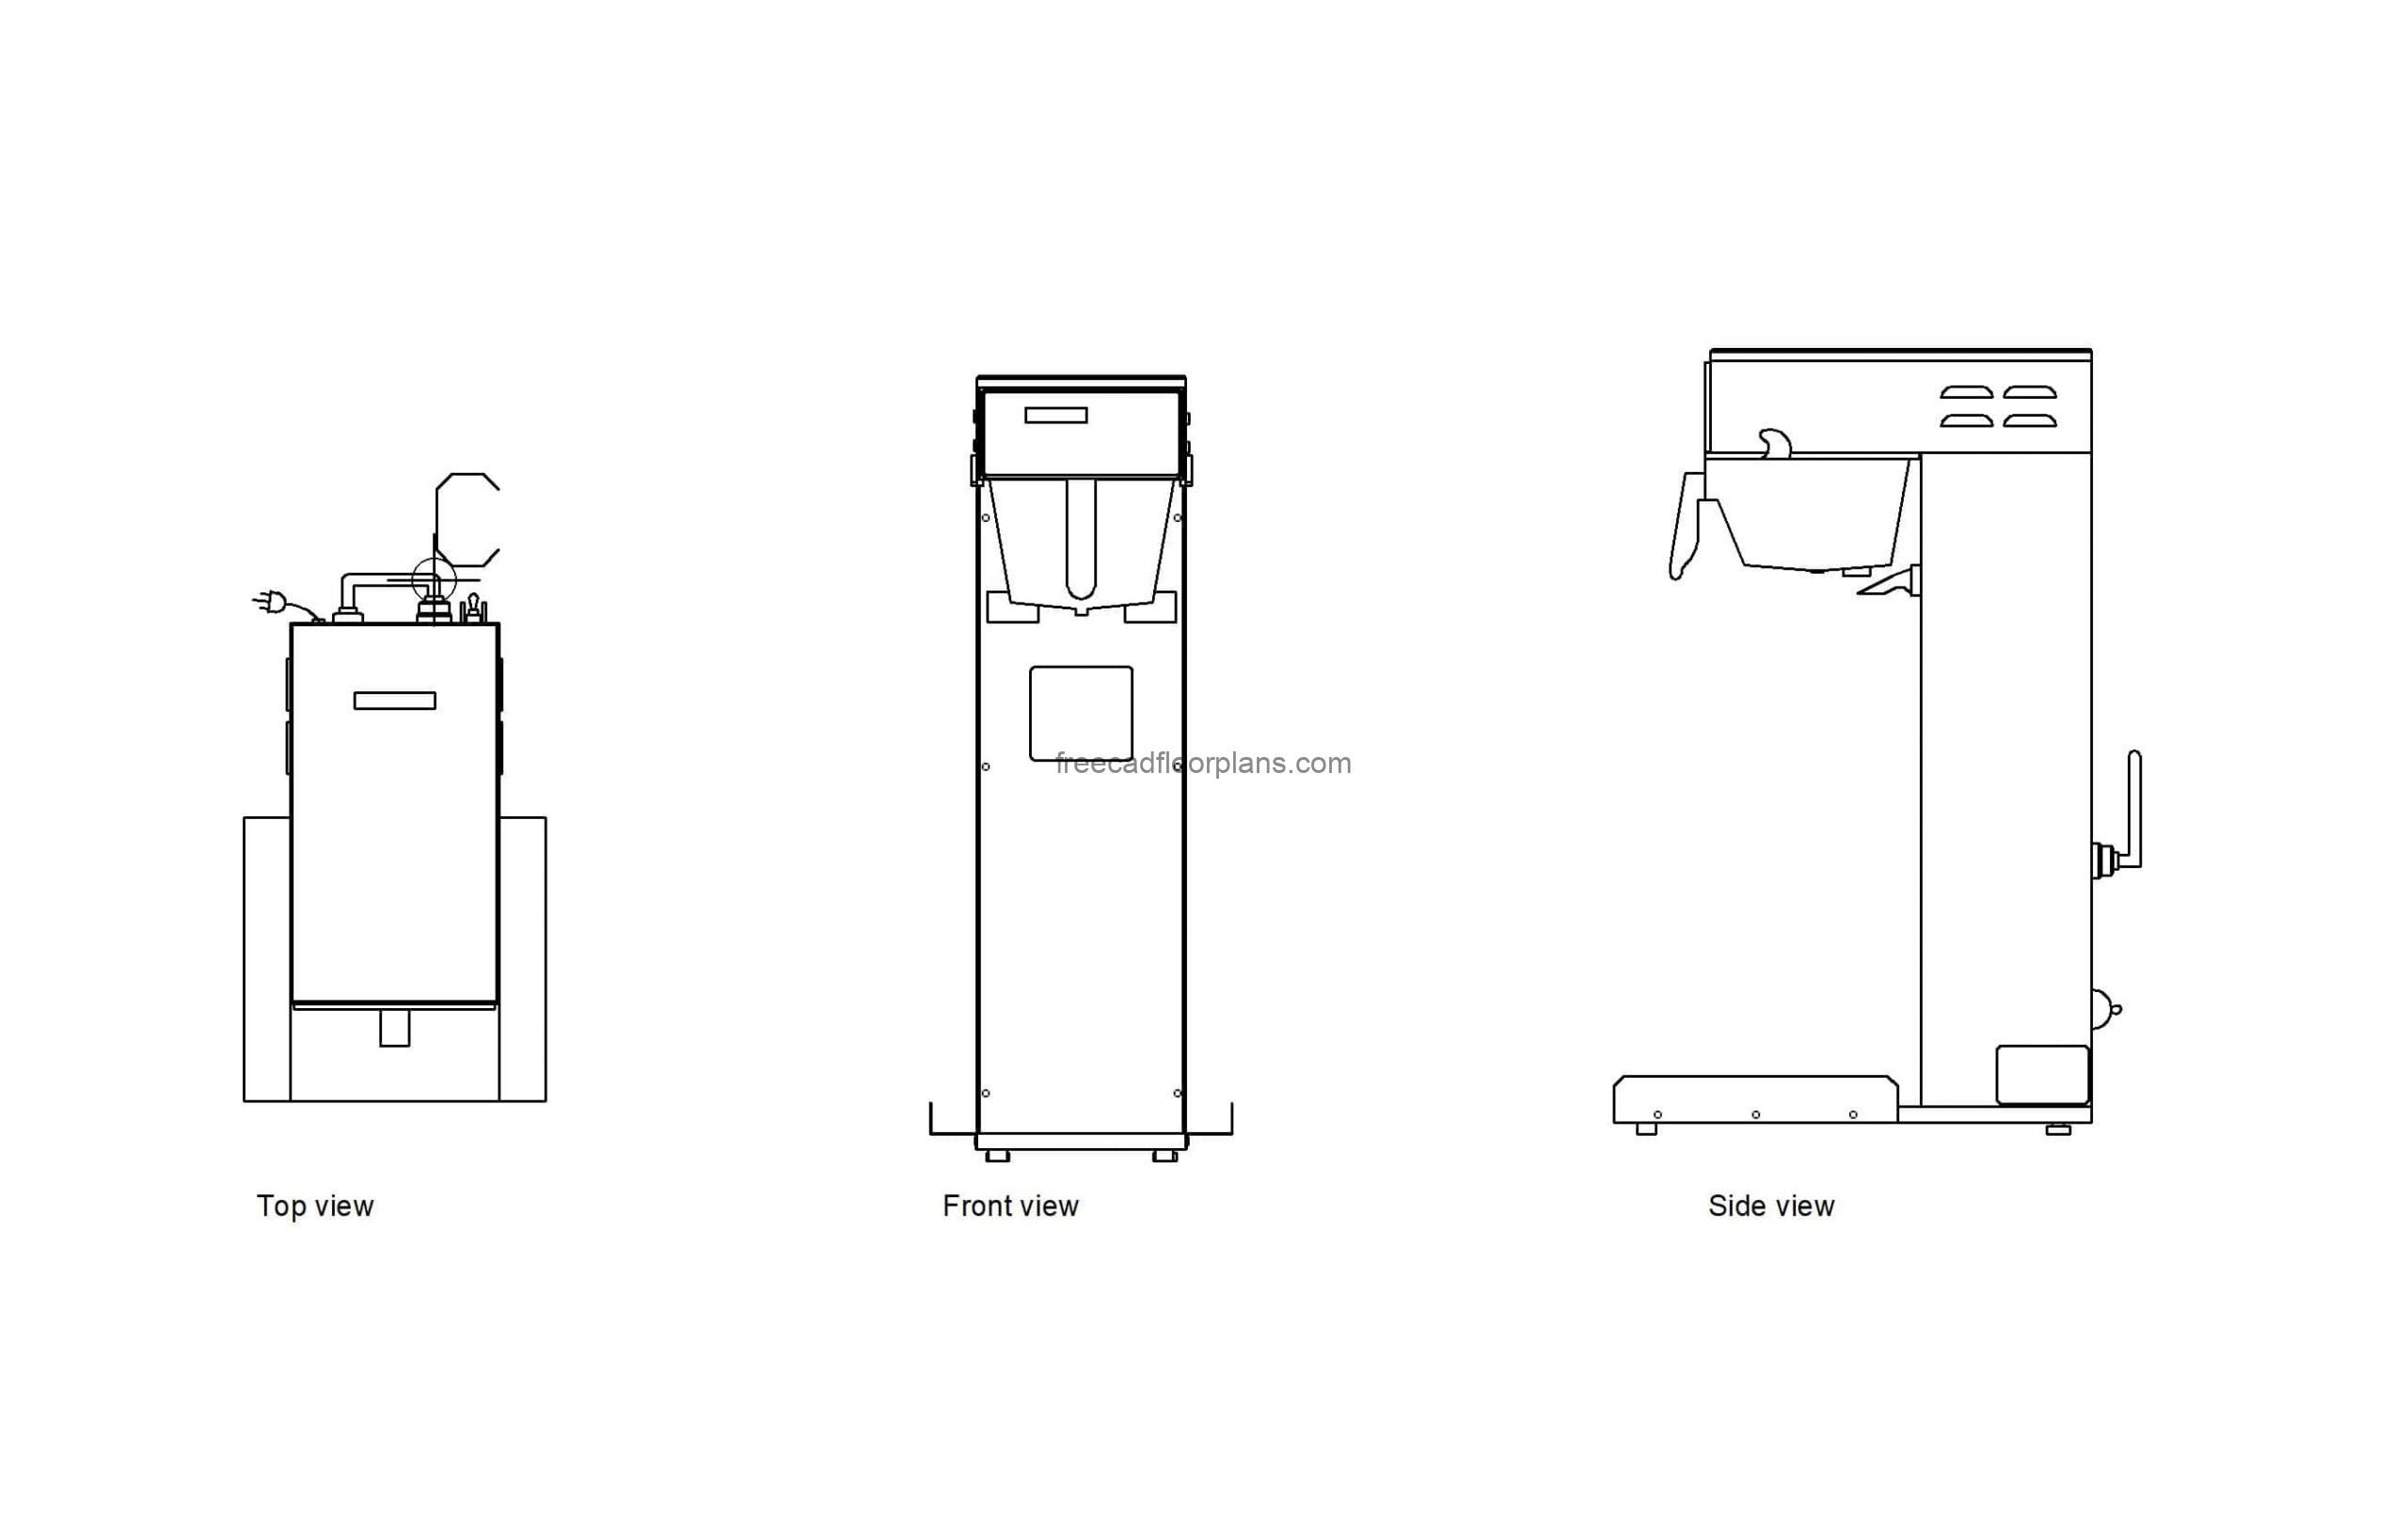 autocad drawing of a curtis rstb ice tee and coffee dispenser, 2d views, dwg file free for download